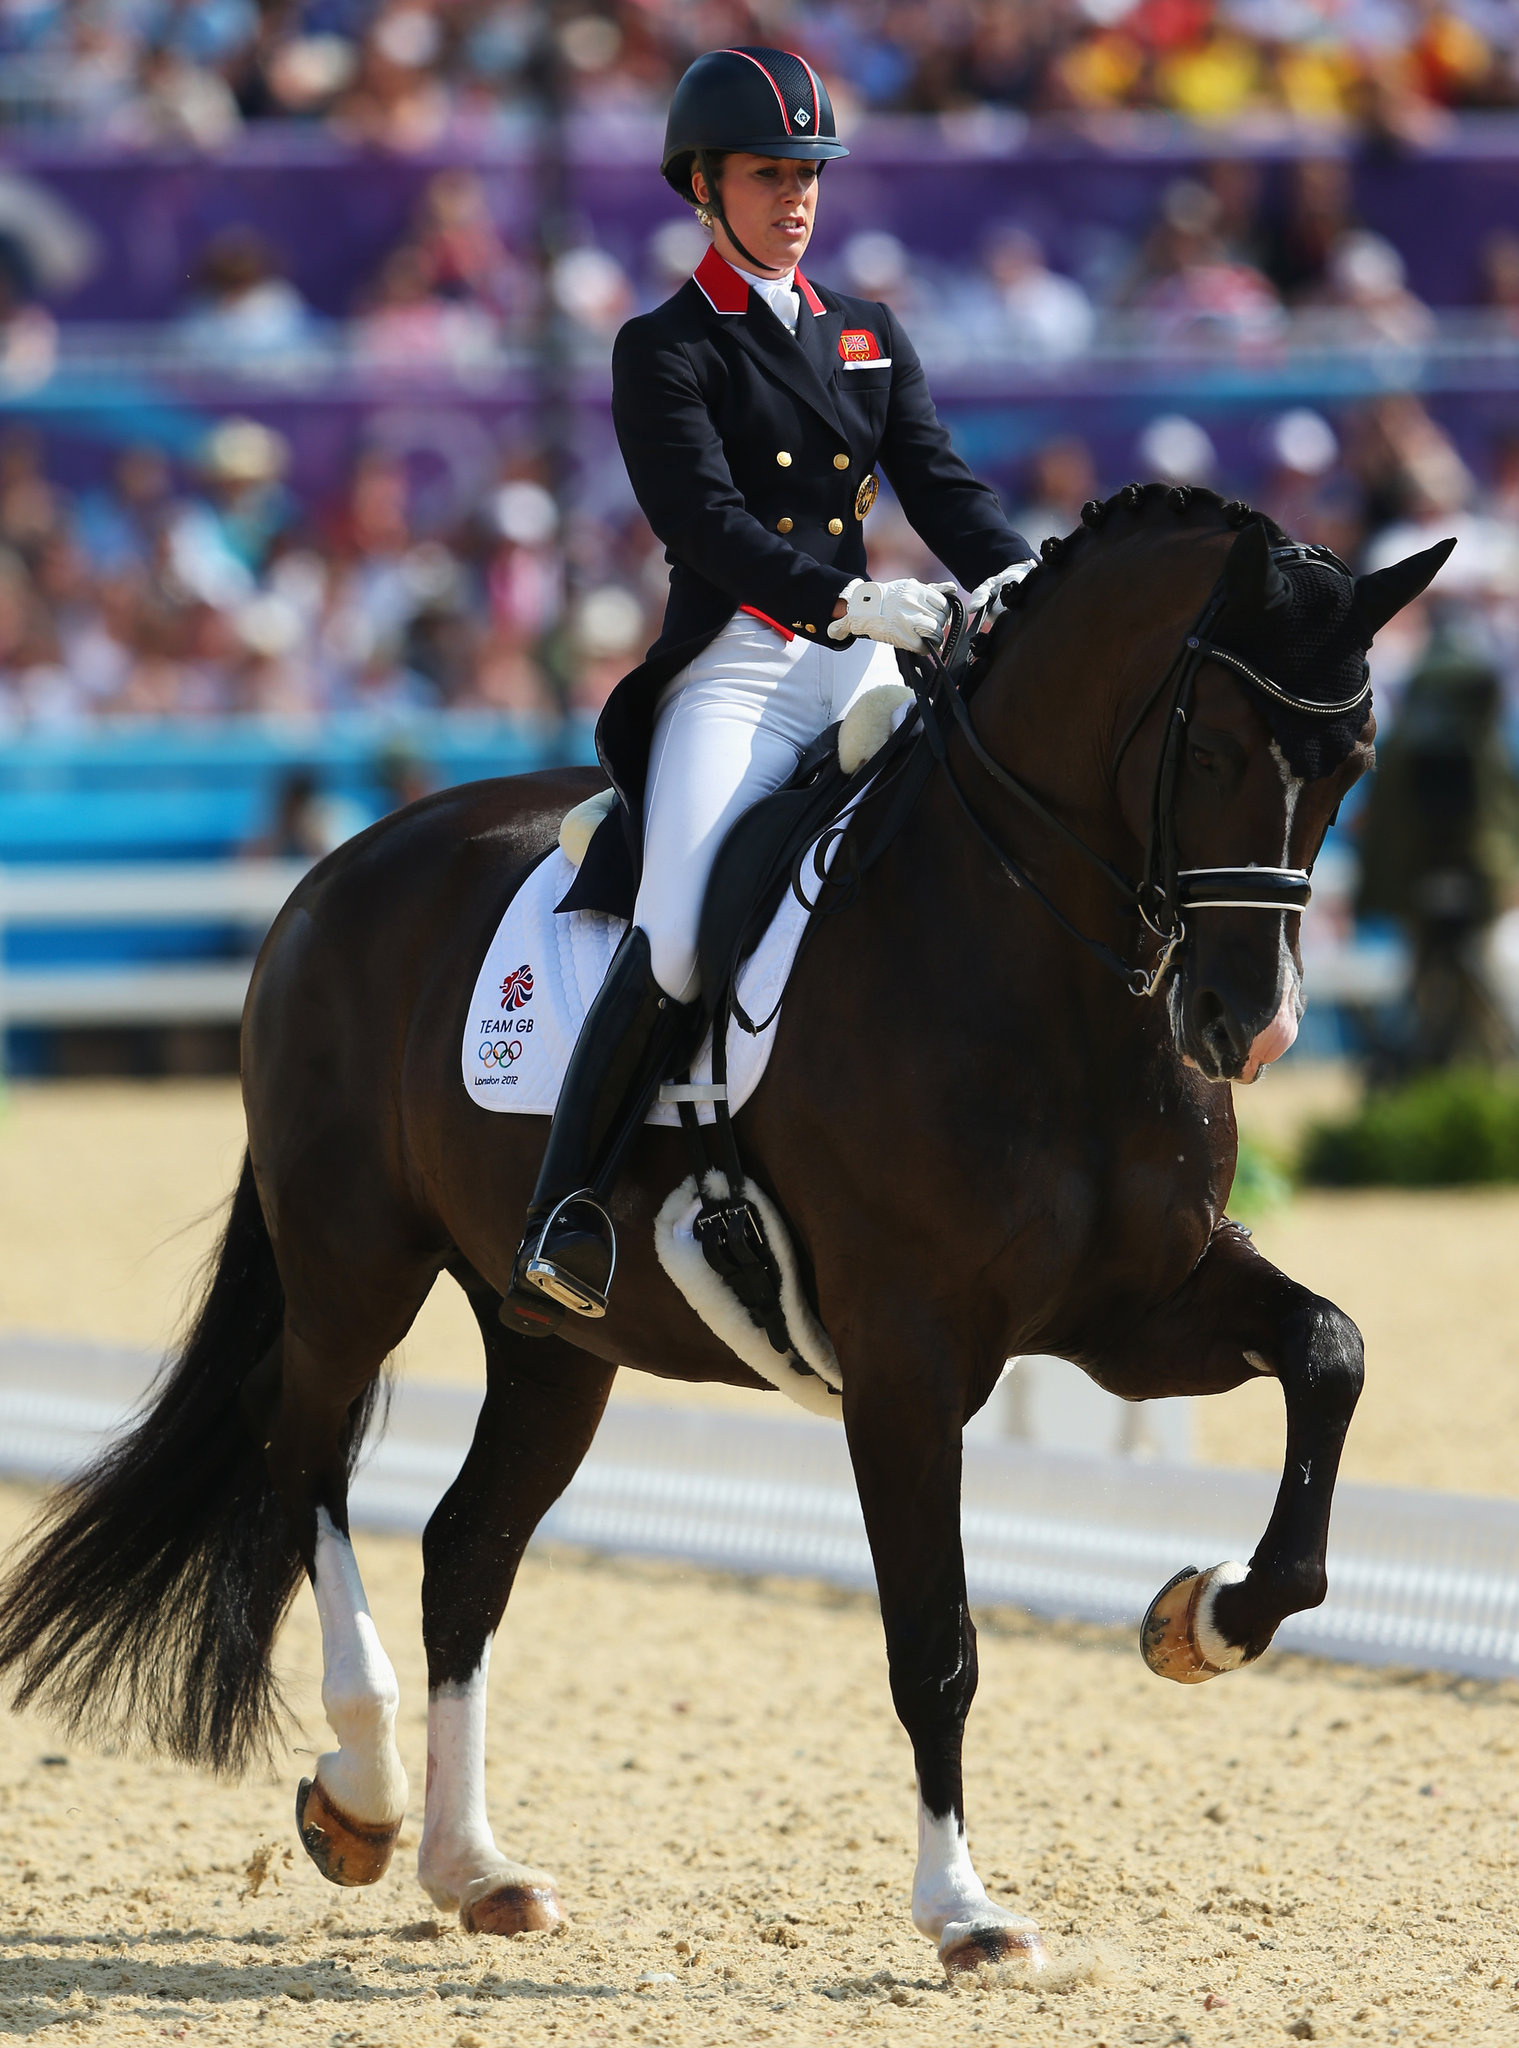 Dressage: Charlotte Dujardin riding Valegro At Rio, The Olympic Games, August 2016. 1520x2050 HD Background.